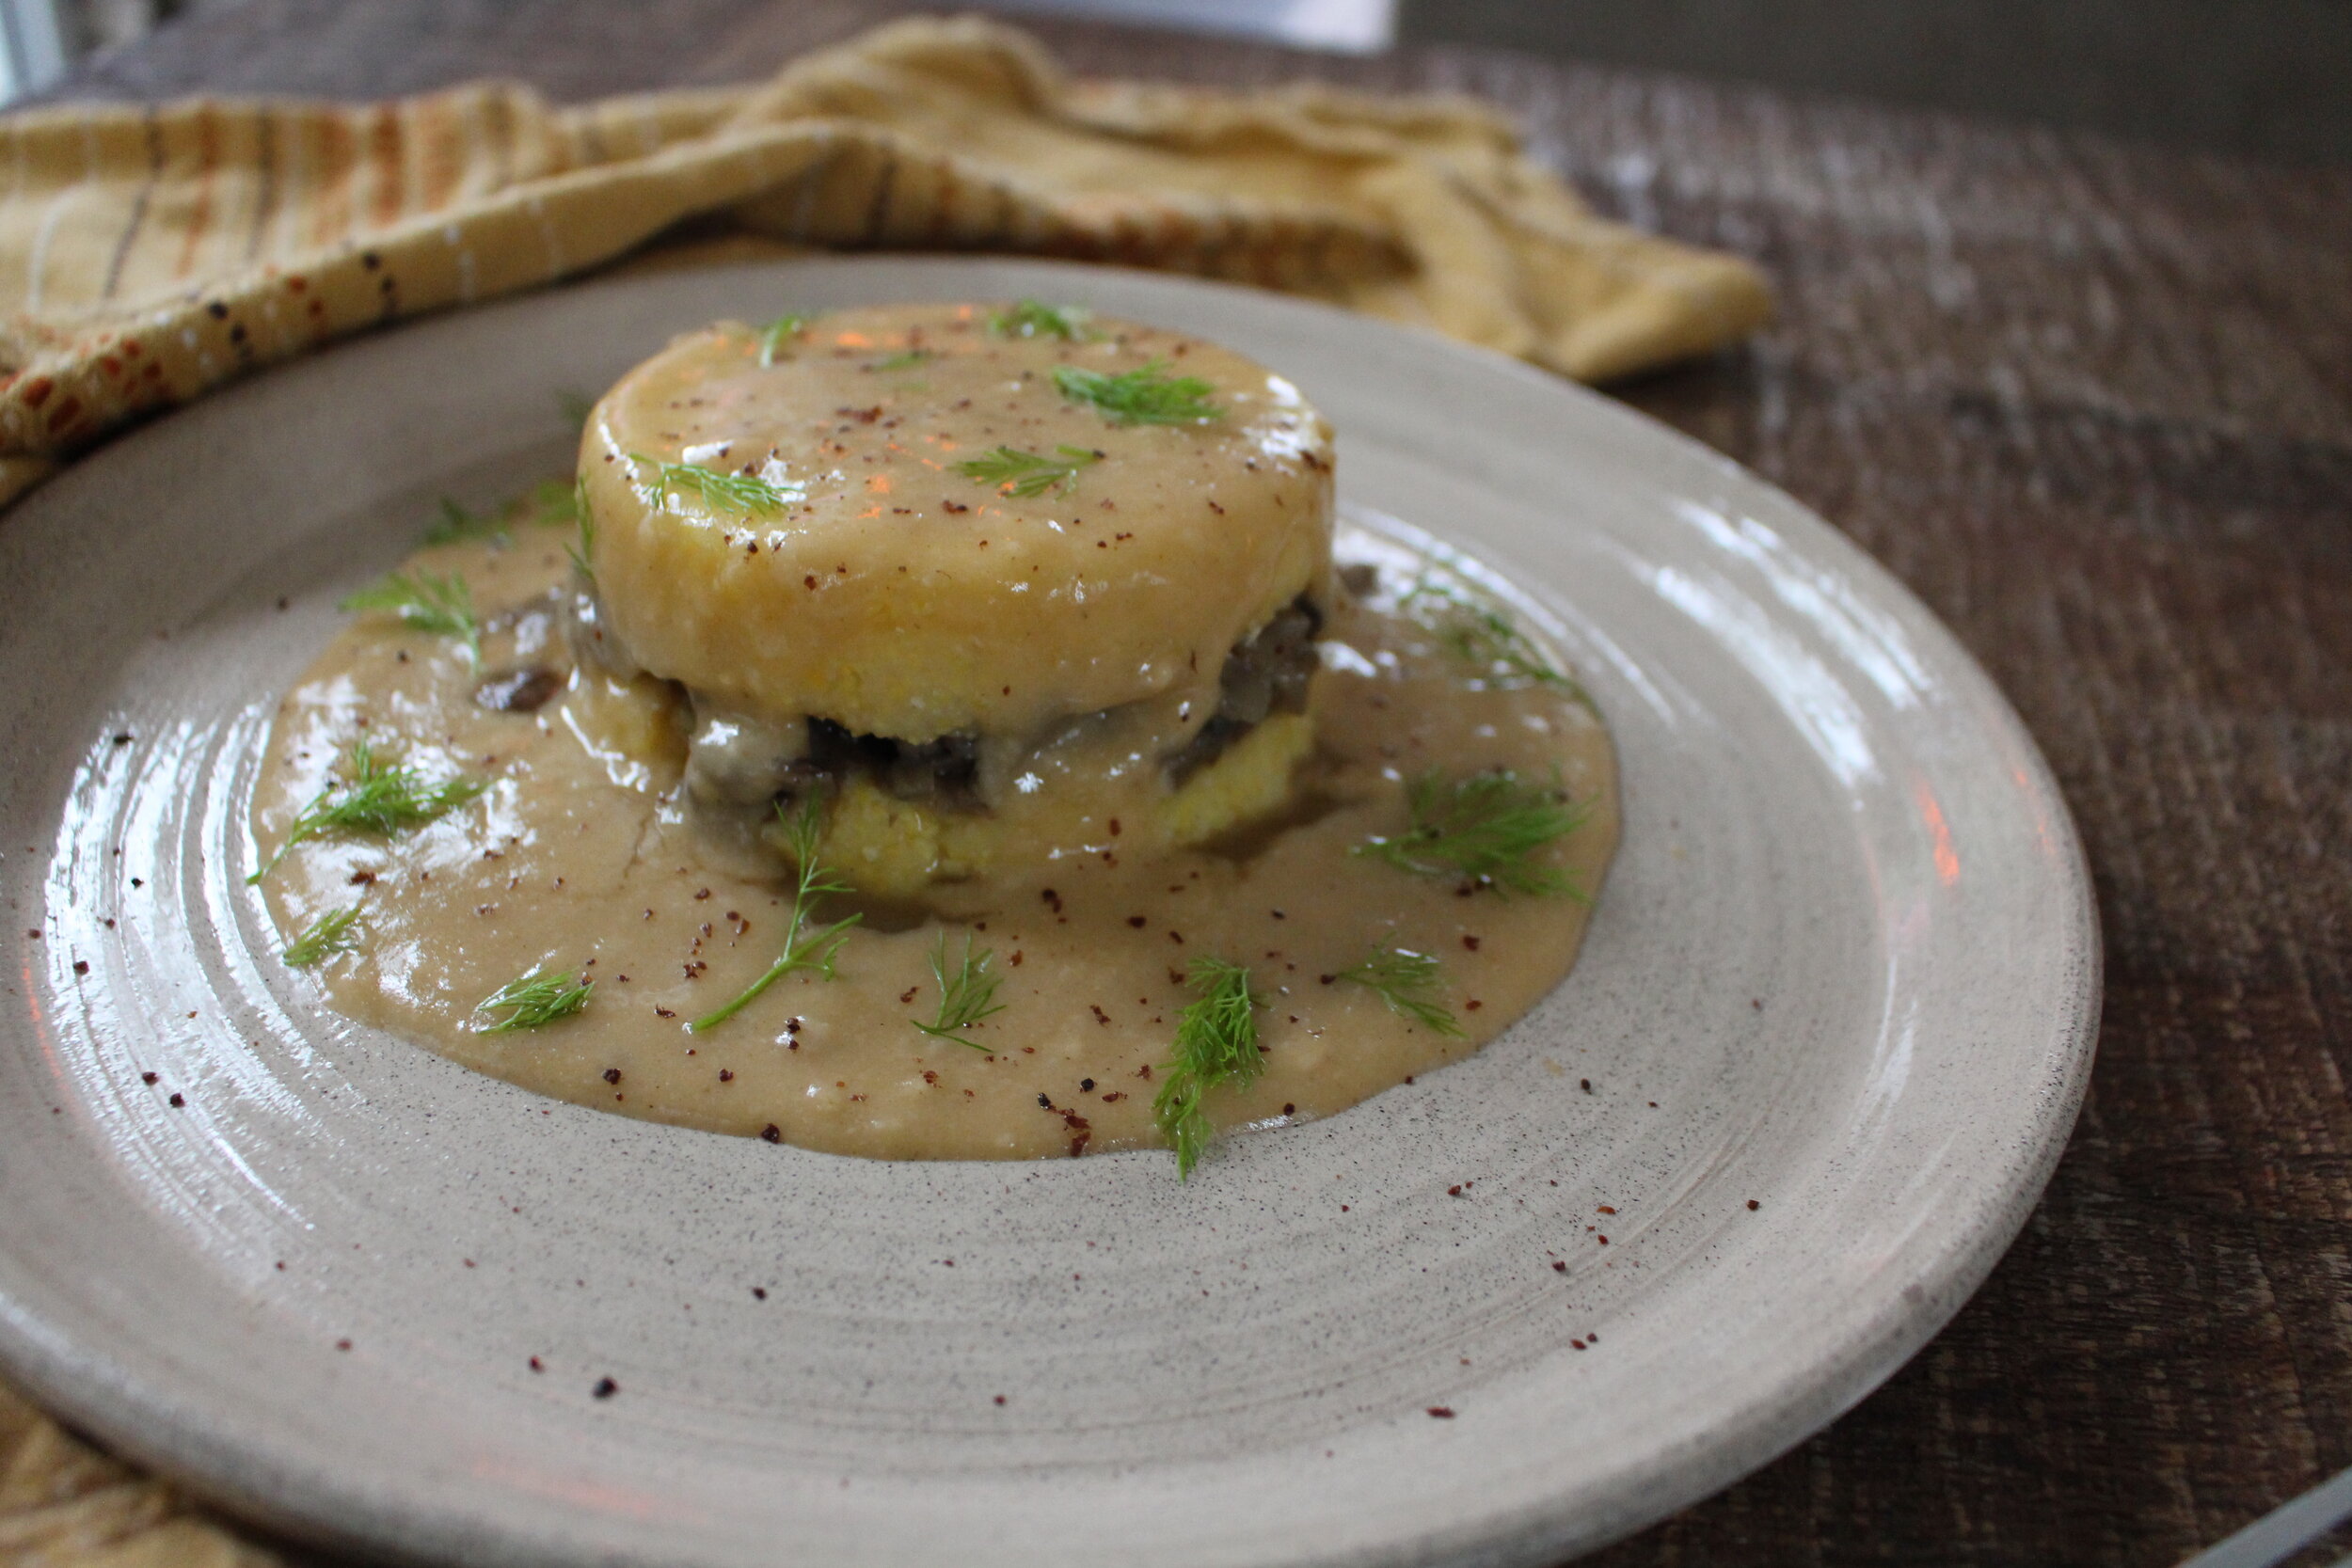 Two patties of polenta with a layer of cooked mushrooms in between and drenched in pale gravy with dill pieces and pepper on a white plate with a yellow napkin on the side.